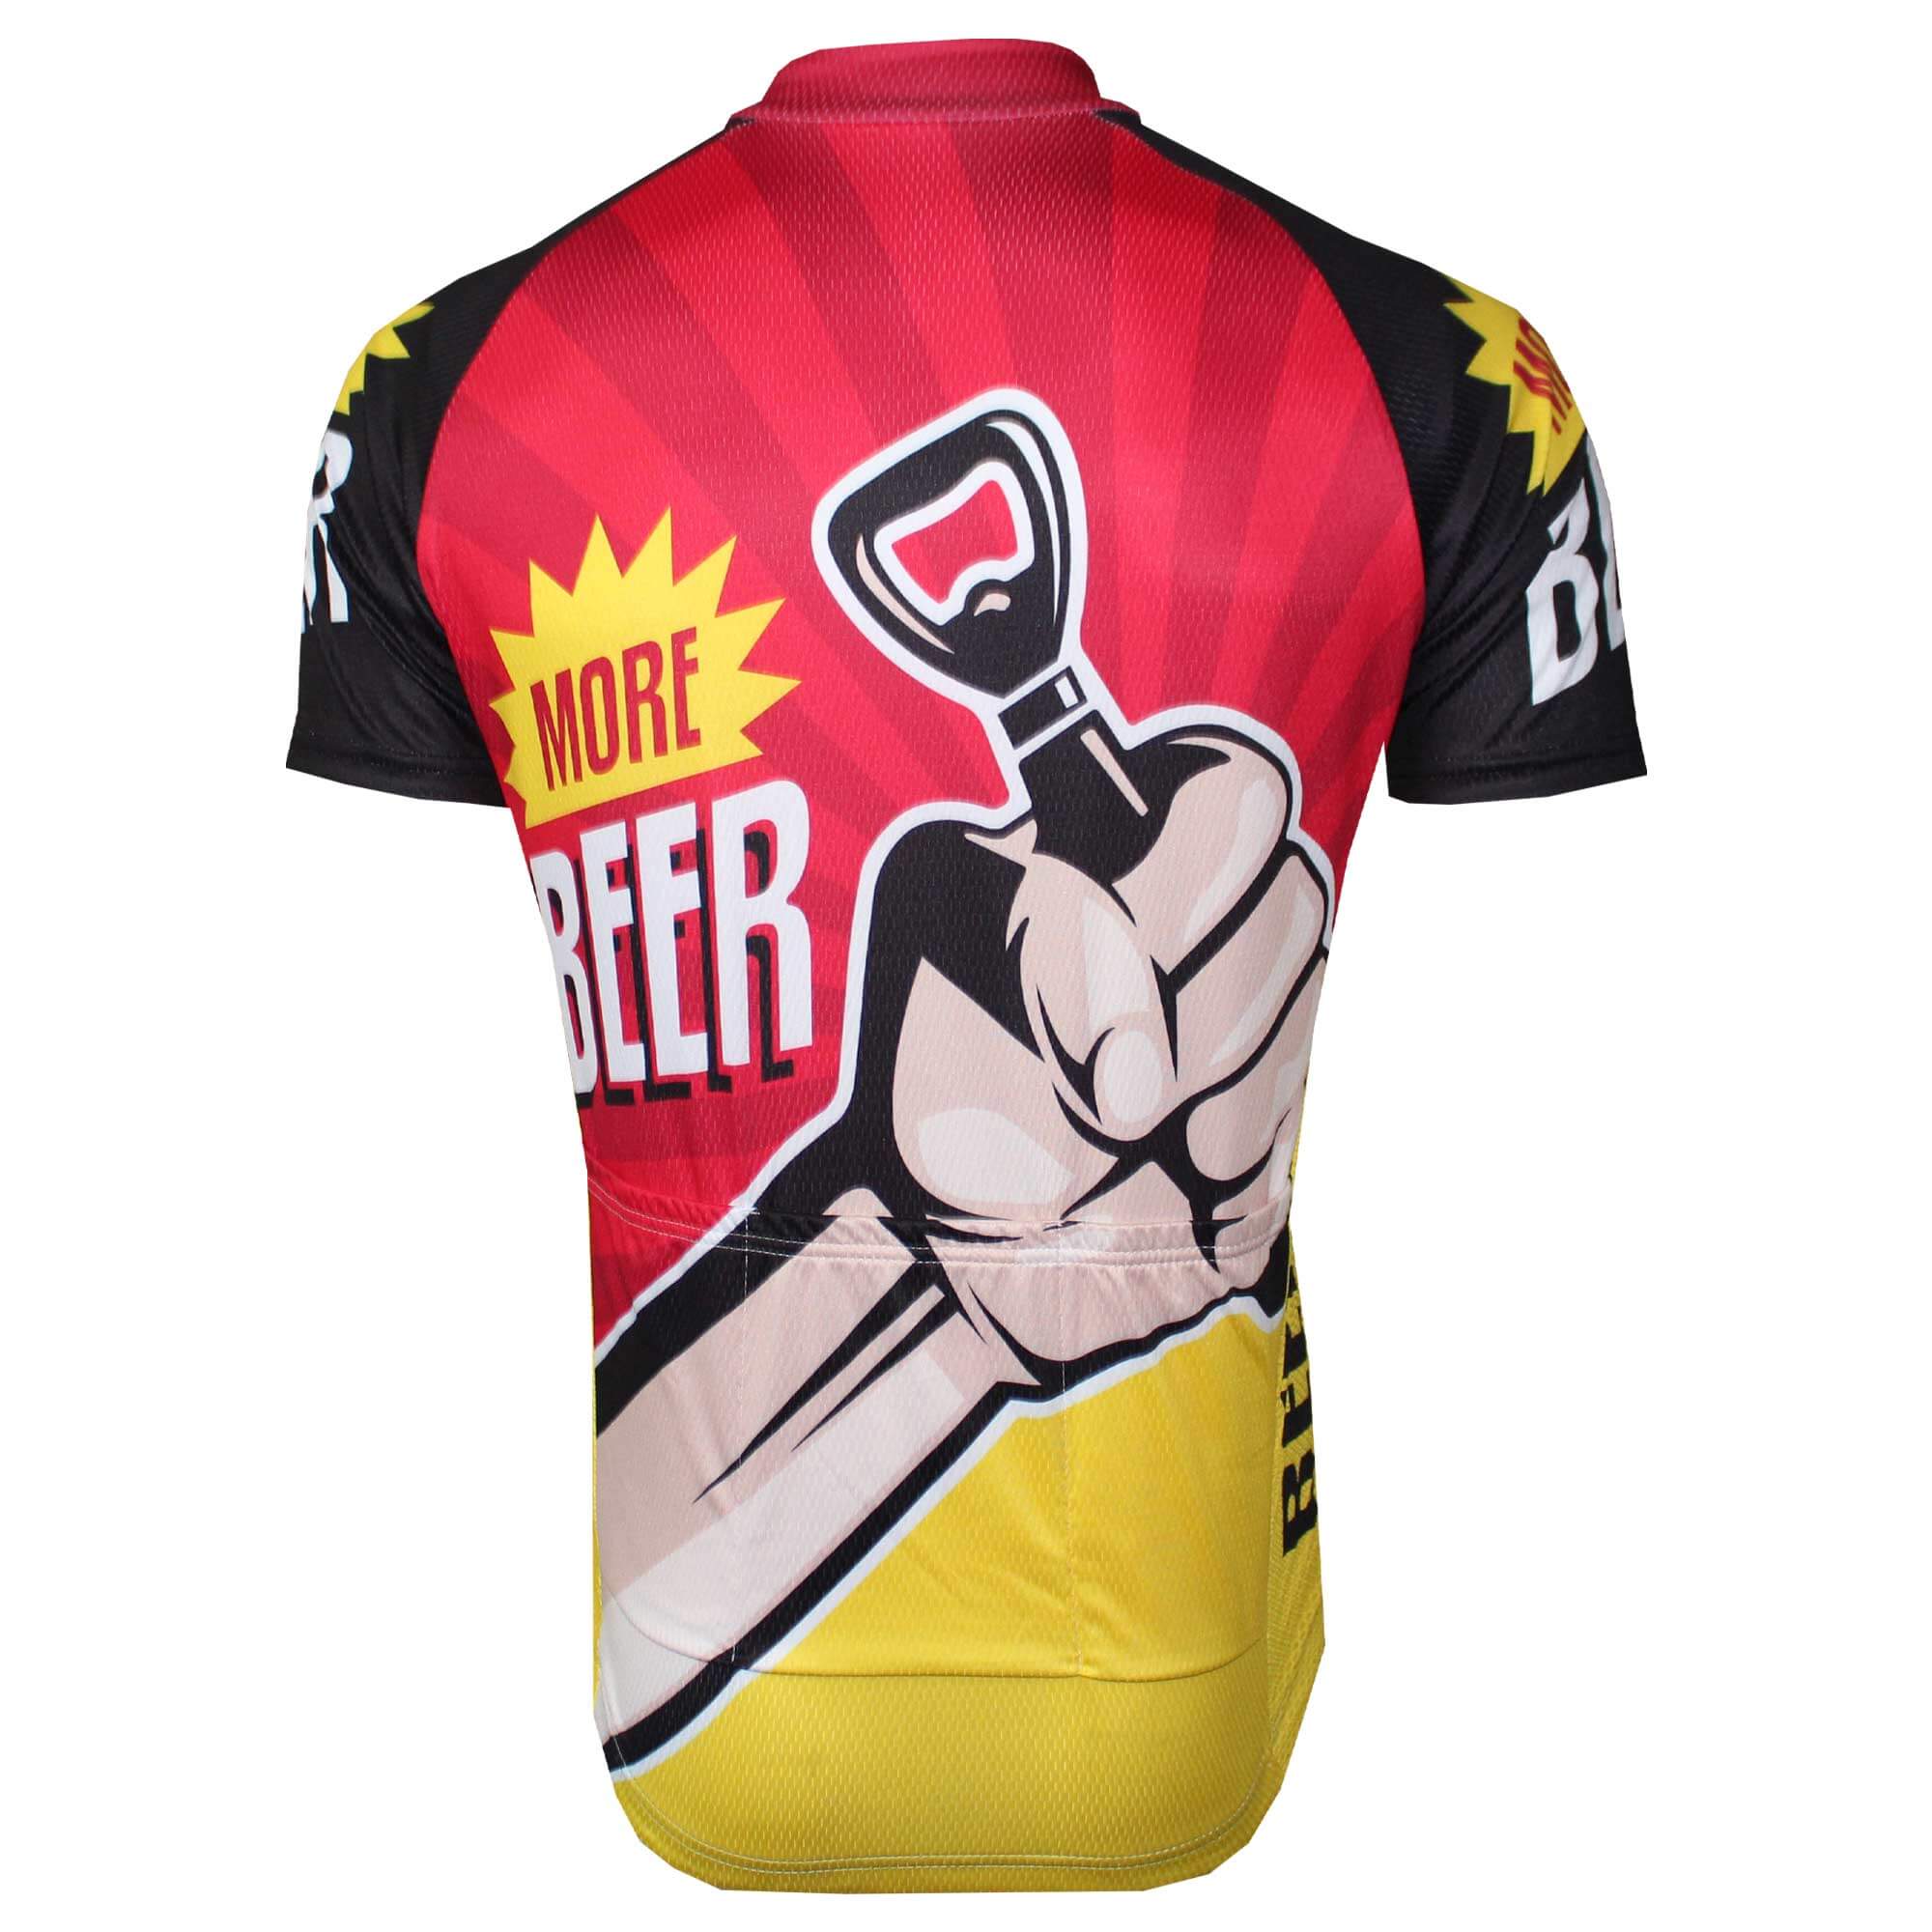 More Beer Bottle Opener Cycling Jersey.